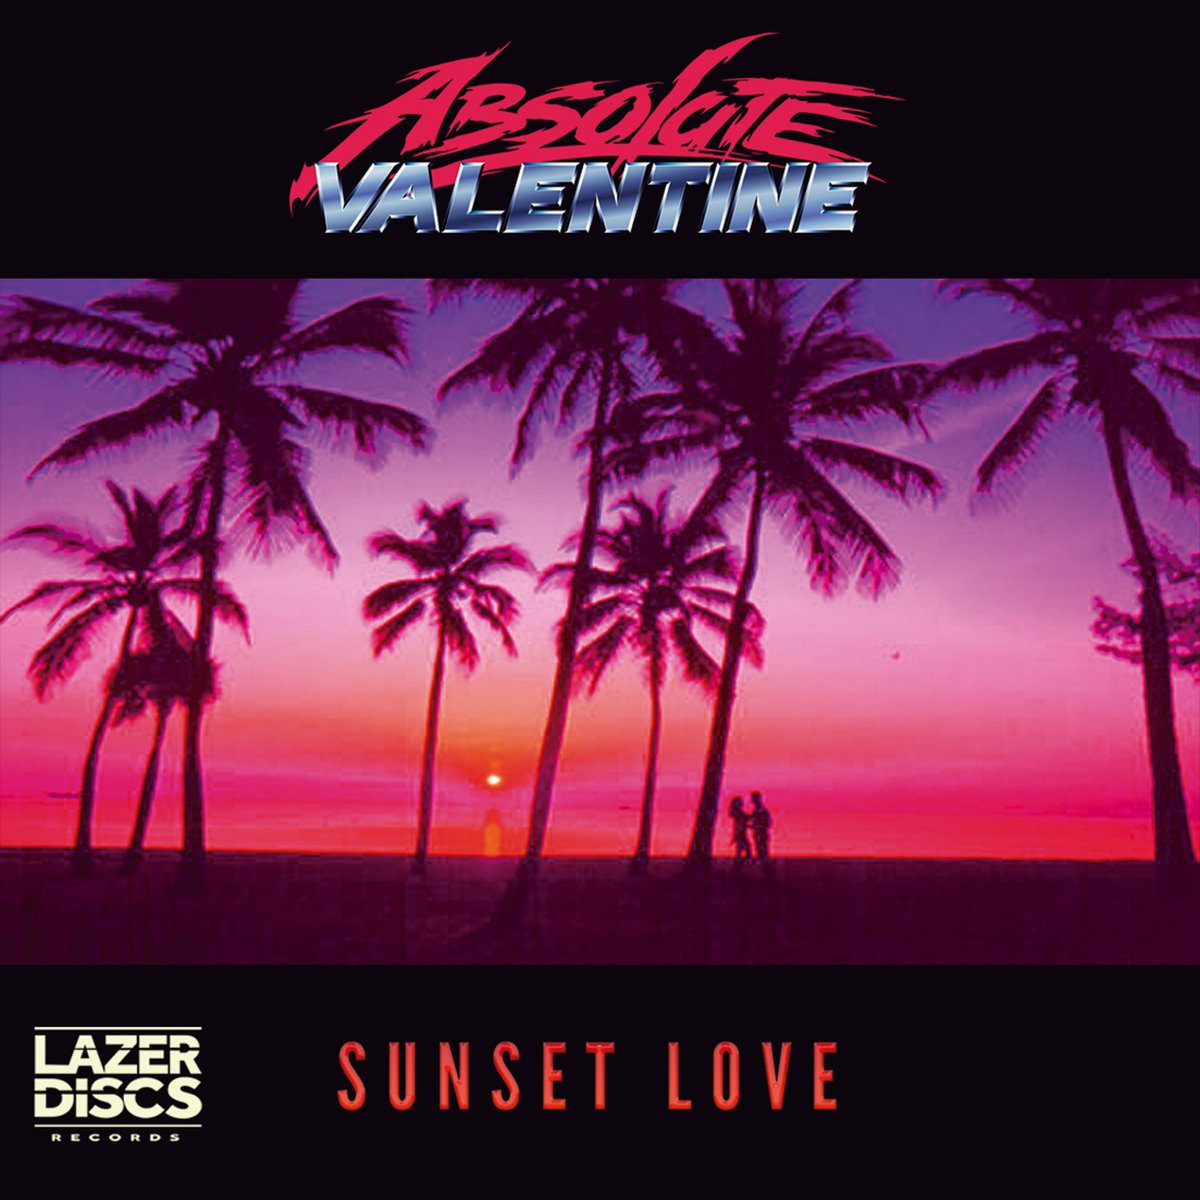 Yeule - Absolute Valentine - Sunset Love